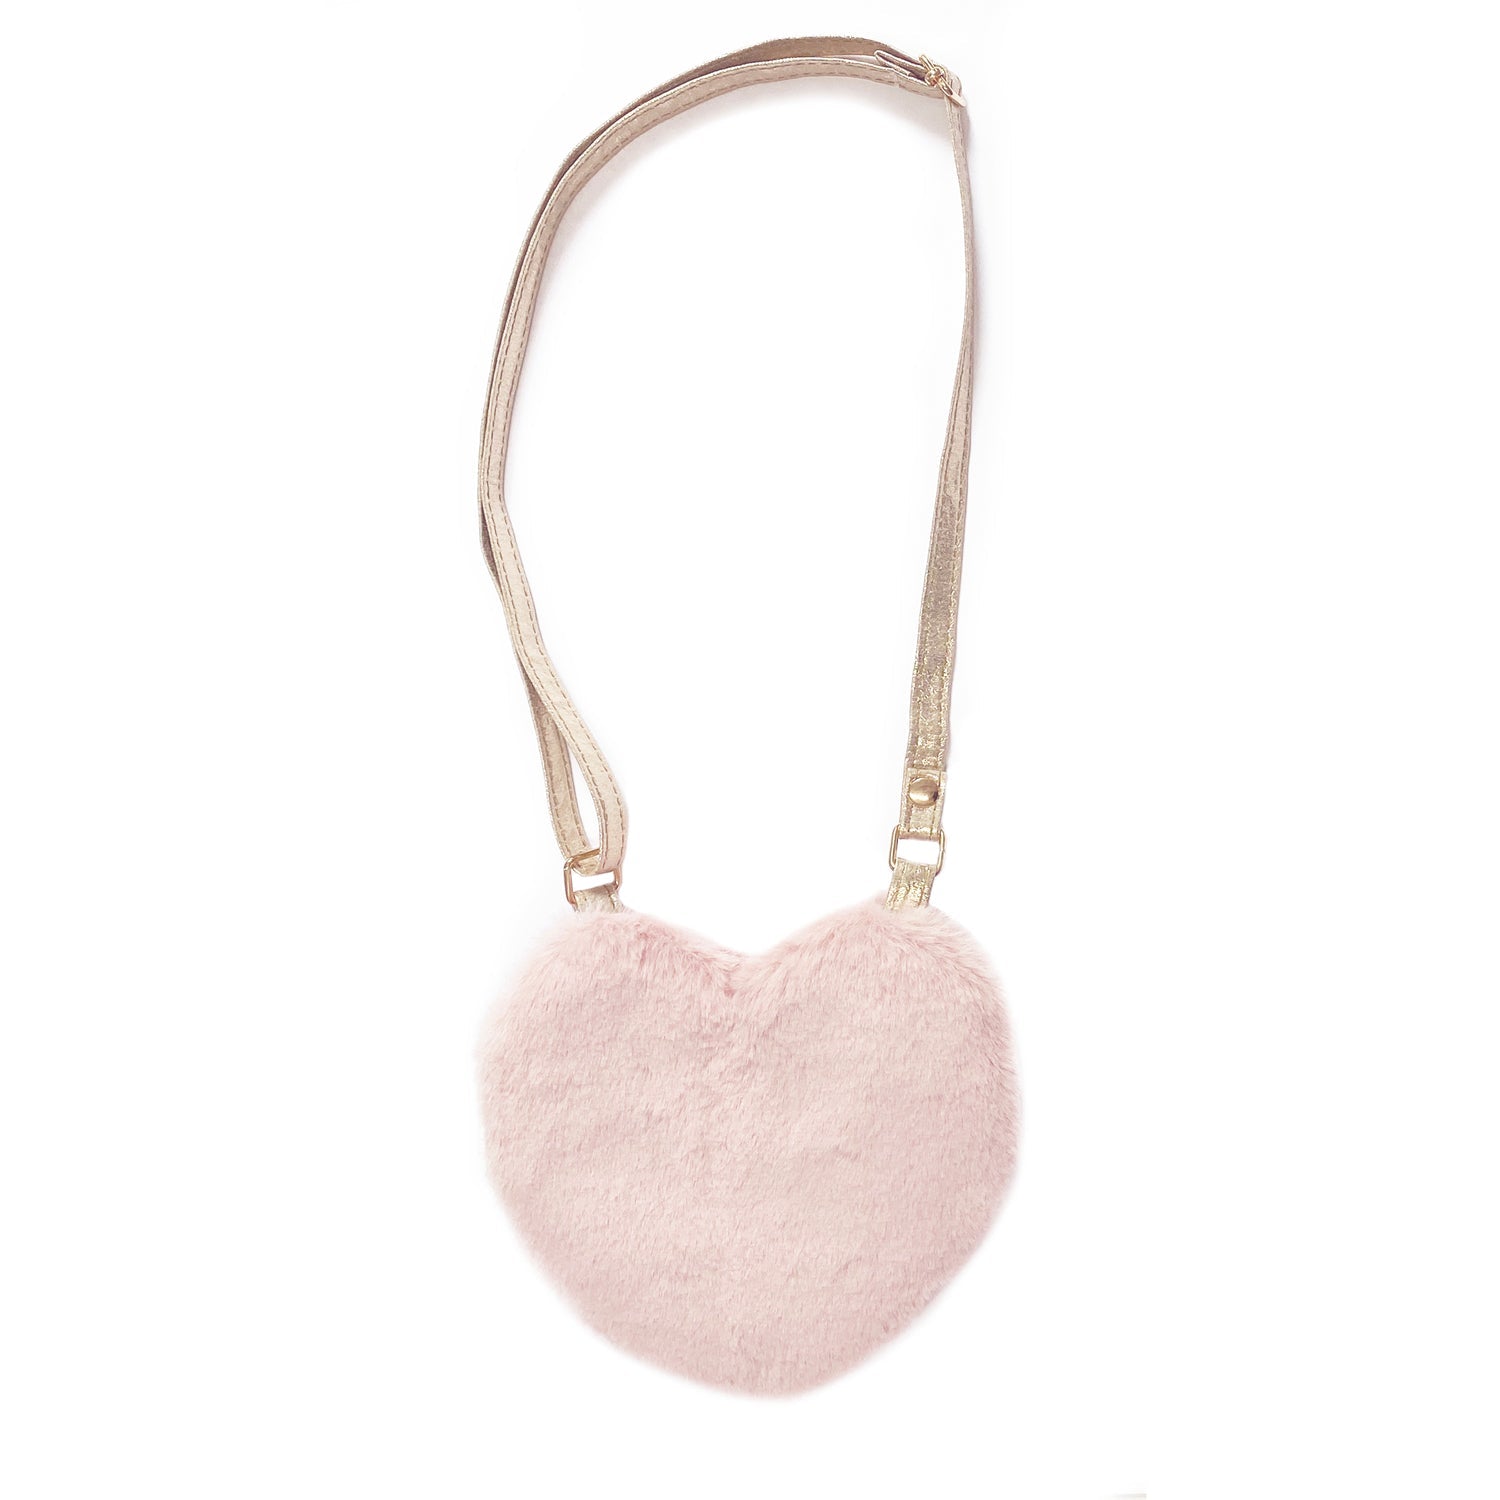 rockahula pink love heart bag / This sweet fluffy cross body bag is the perfect size to stash all of your accessories. Made from super soft pink faux fur, in the cutest heart shape. With a magnetic dot closure, full lining and an adjustable gold strap with a break point for safety.